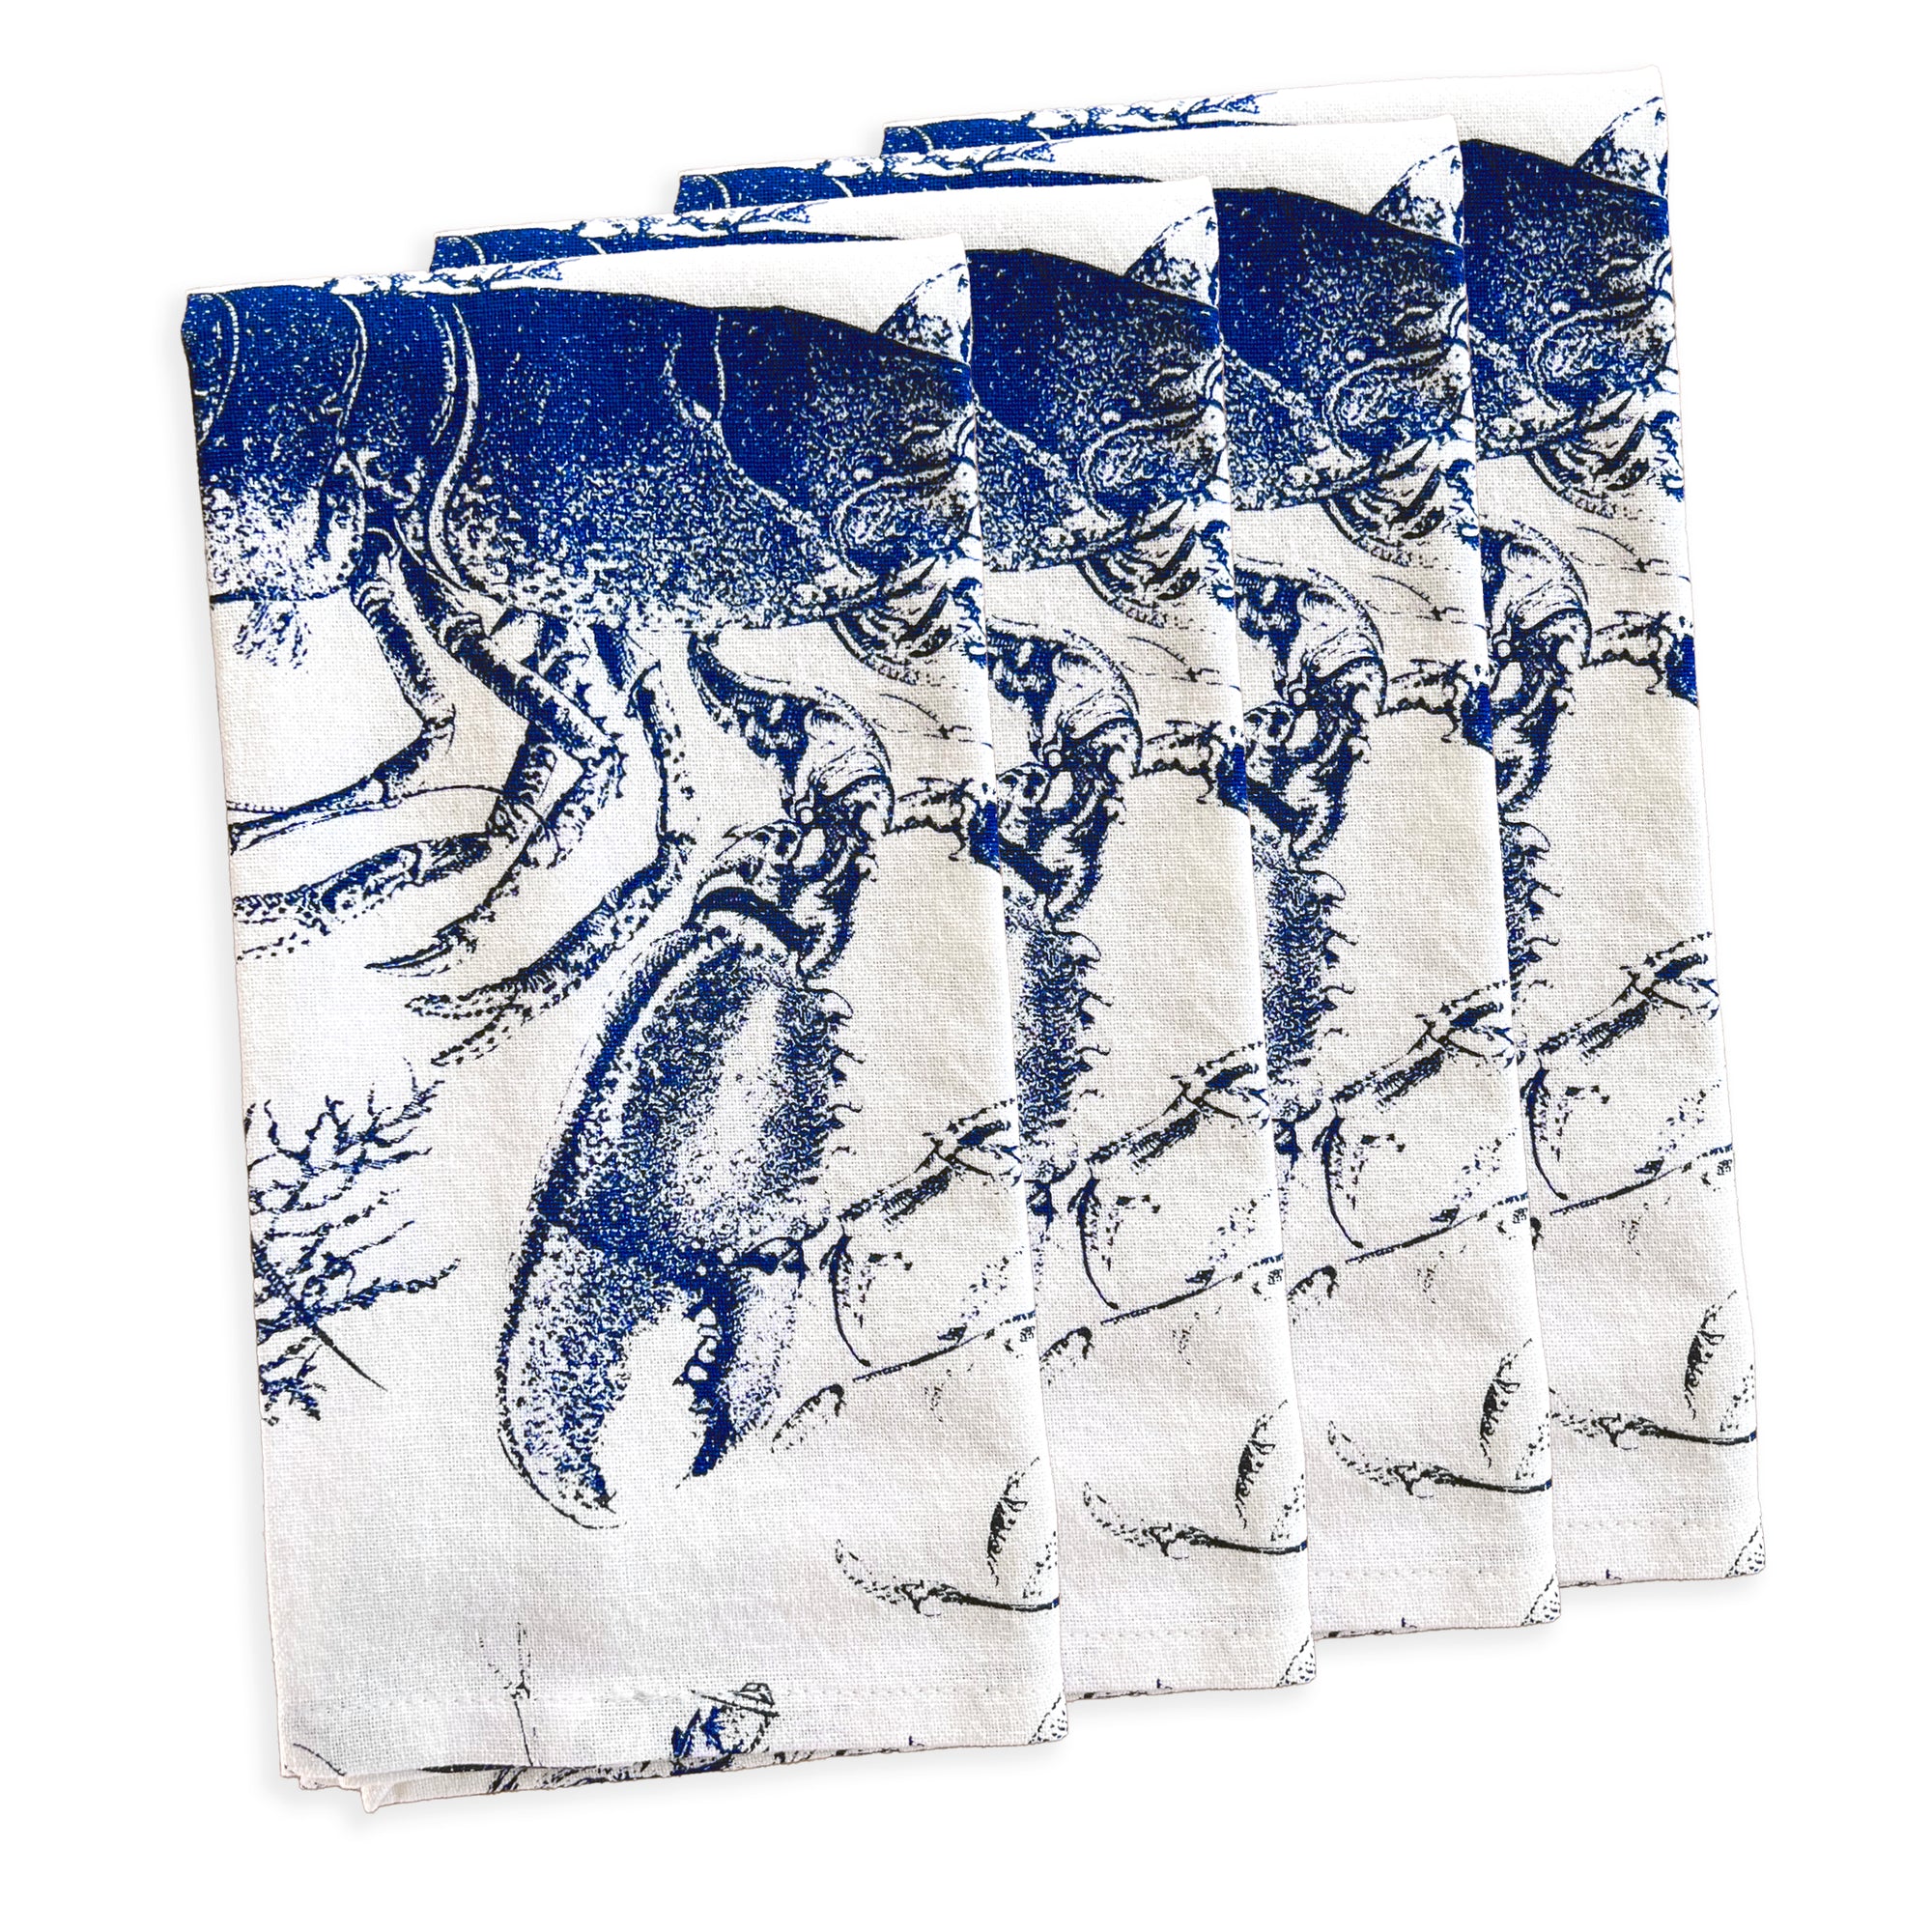 100% cotton Blue Lobster set of 4 dinner napkins from Caskata on a white background.